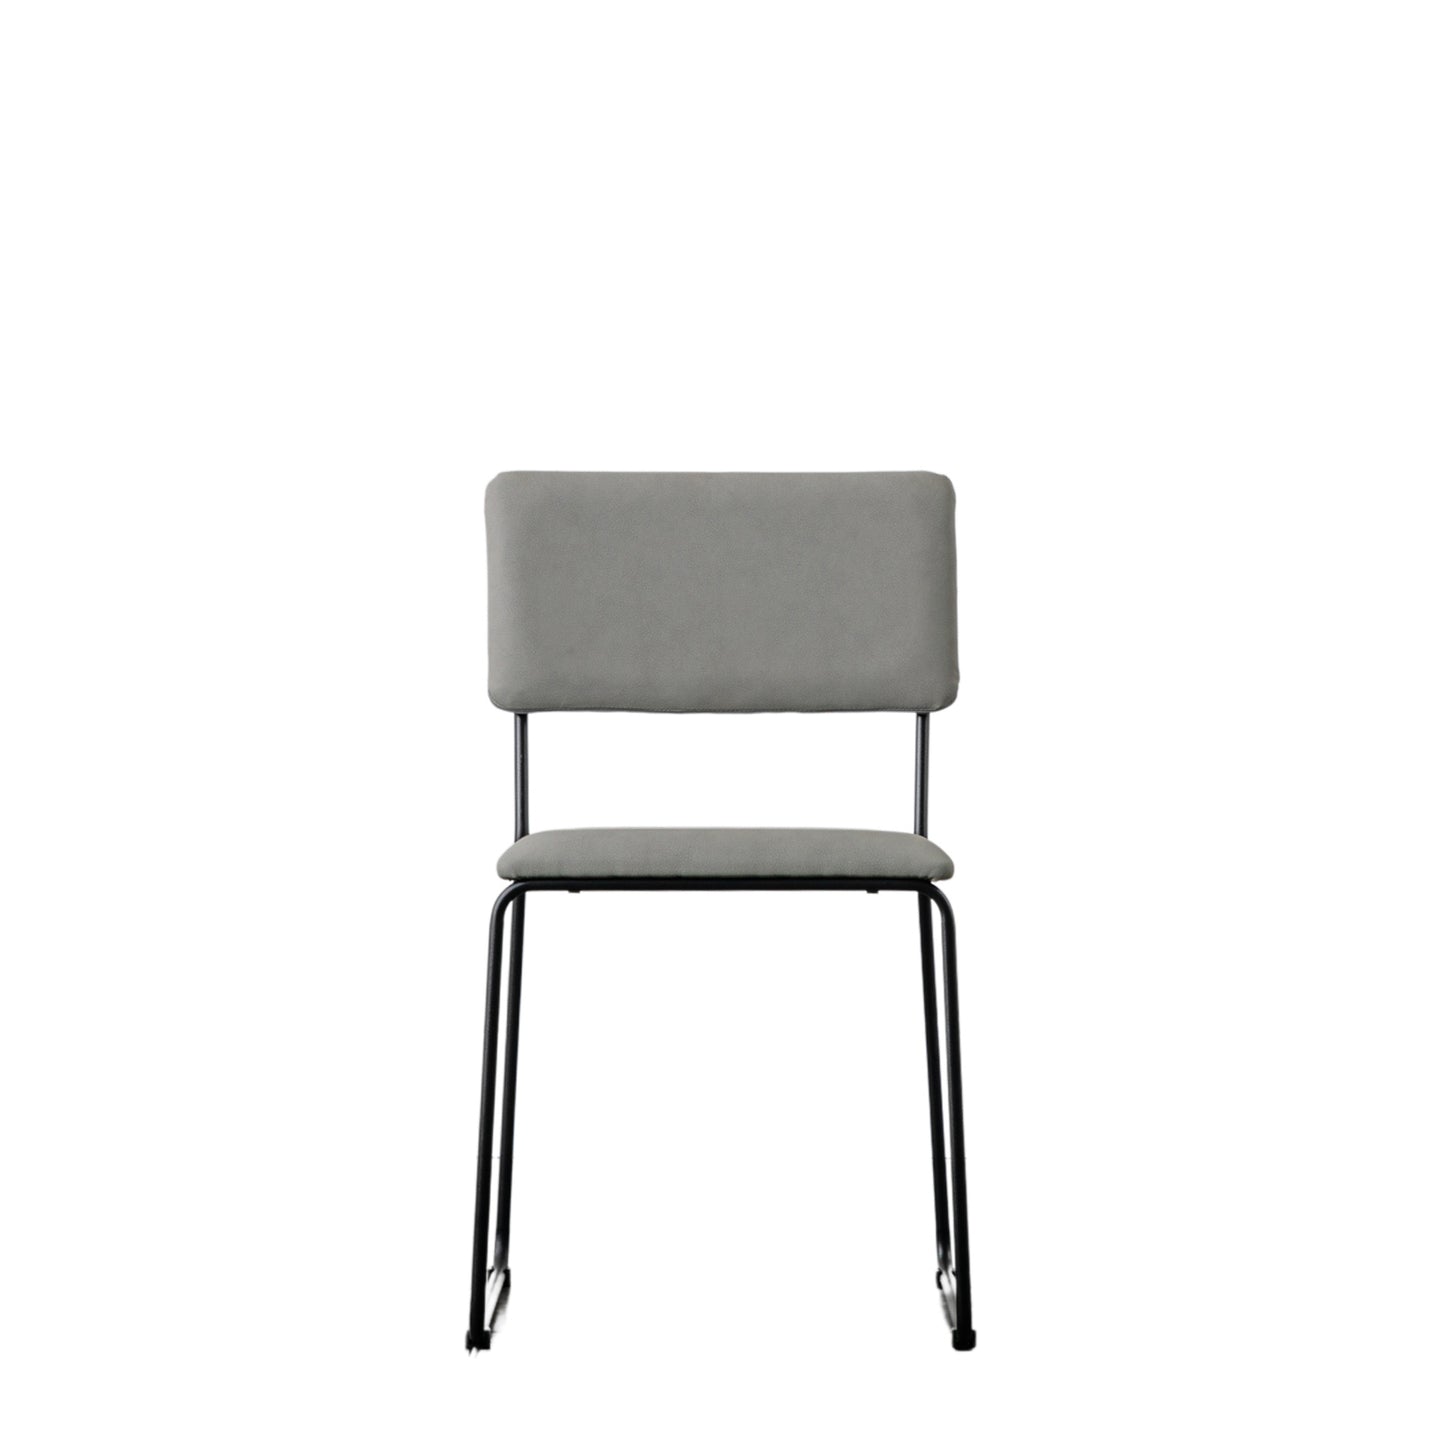 Chivelstone Dining Chair Silver Grey (2pk) with black frame, perfect for interior decor or home furniture, available at Kikiathome.co.uk.